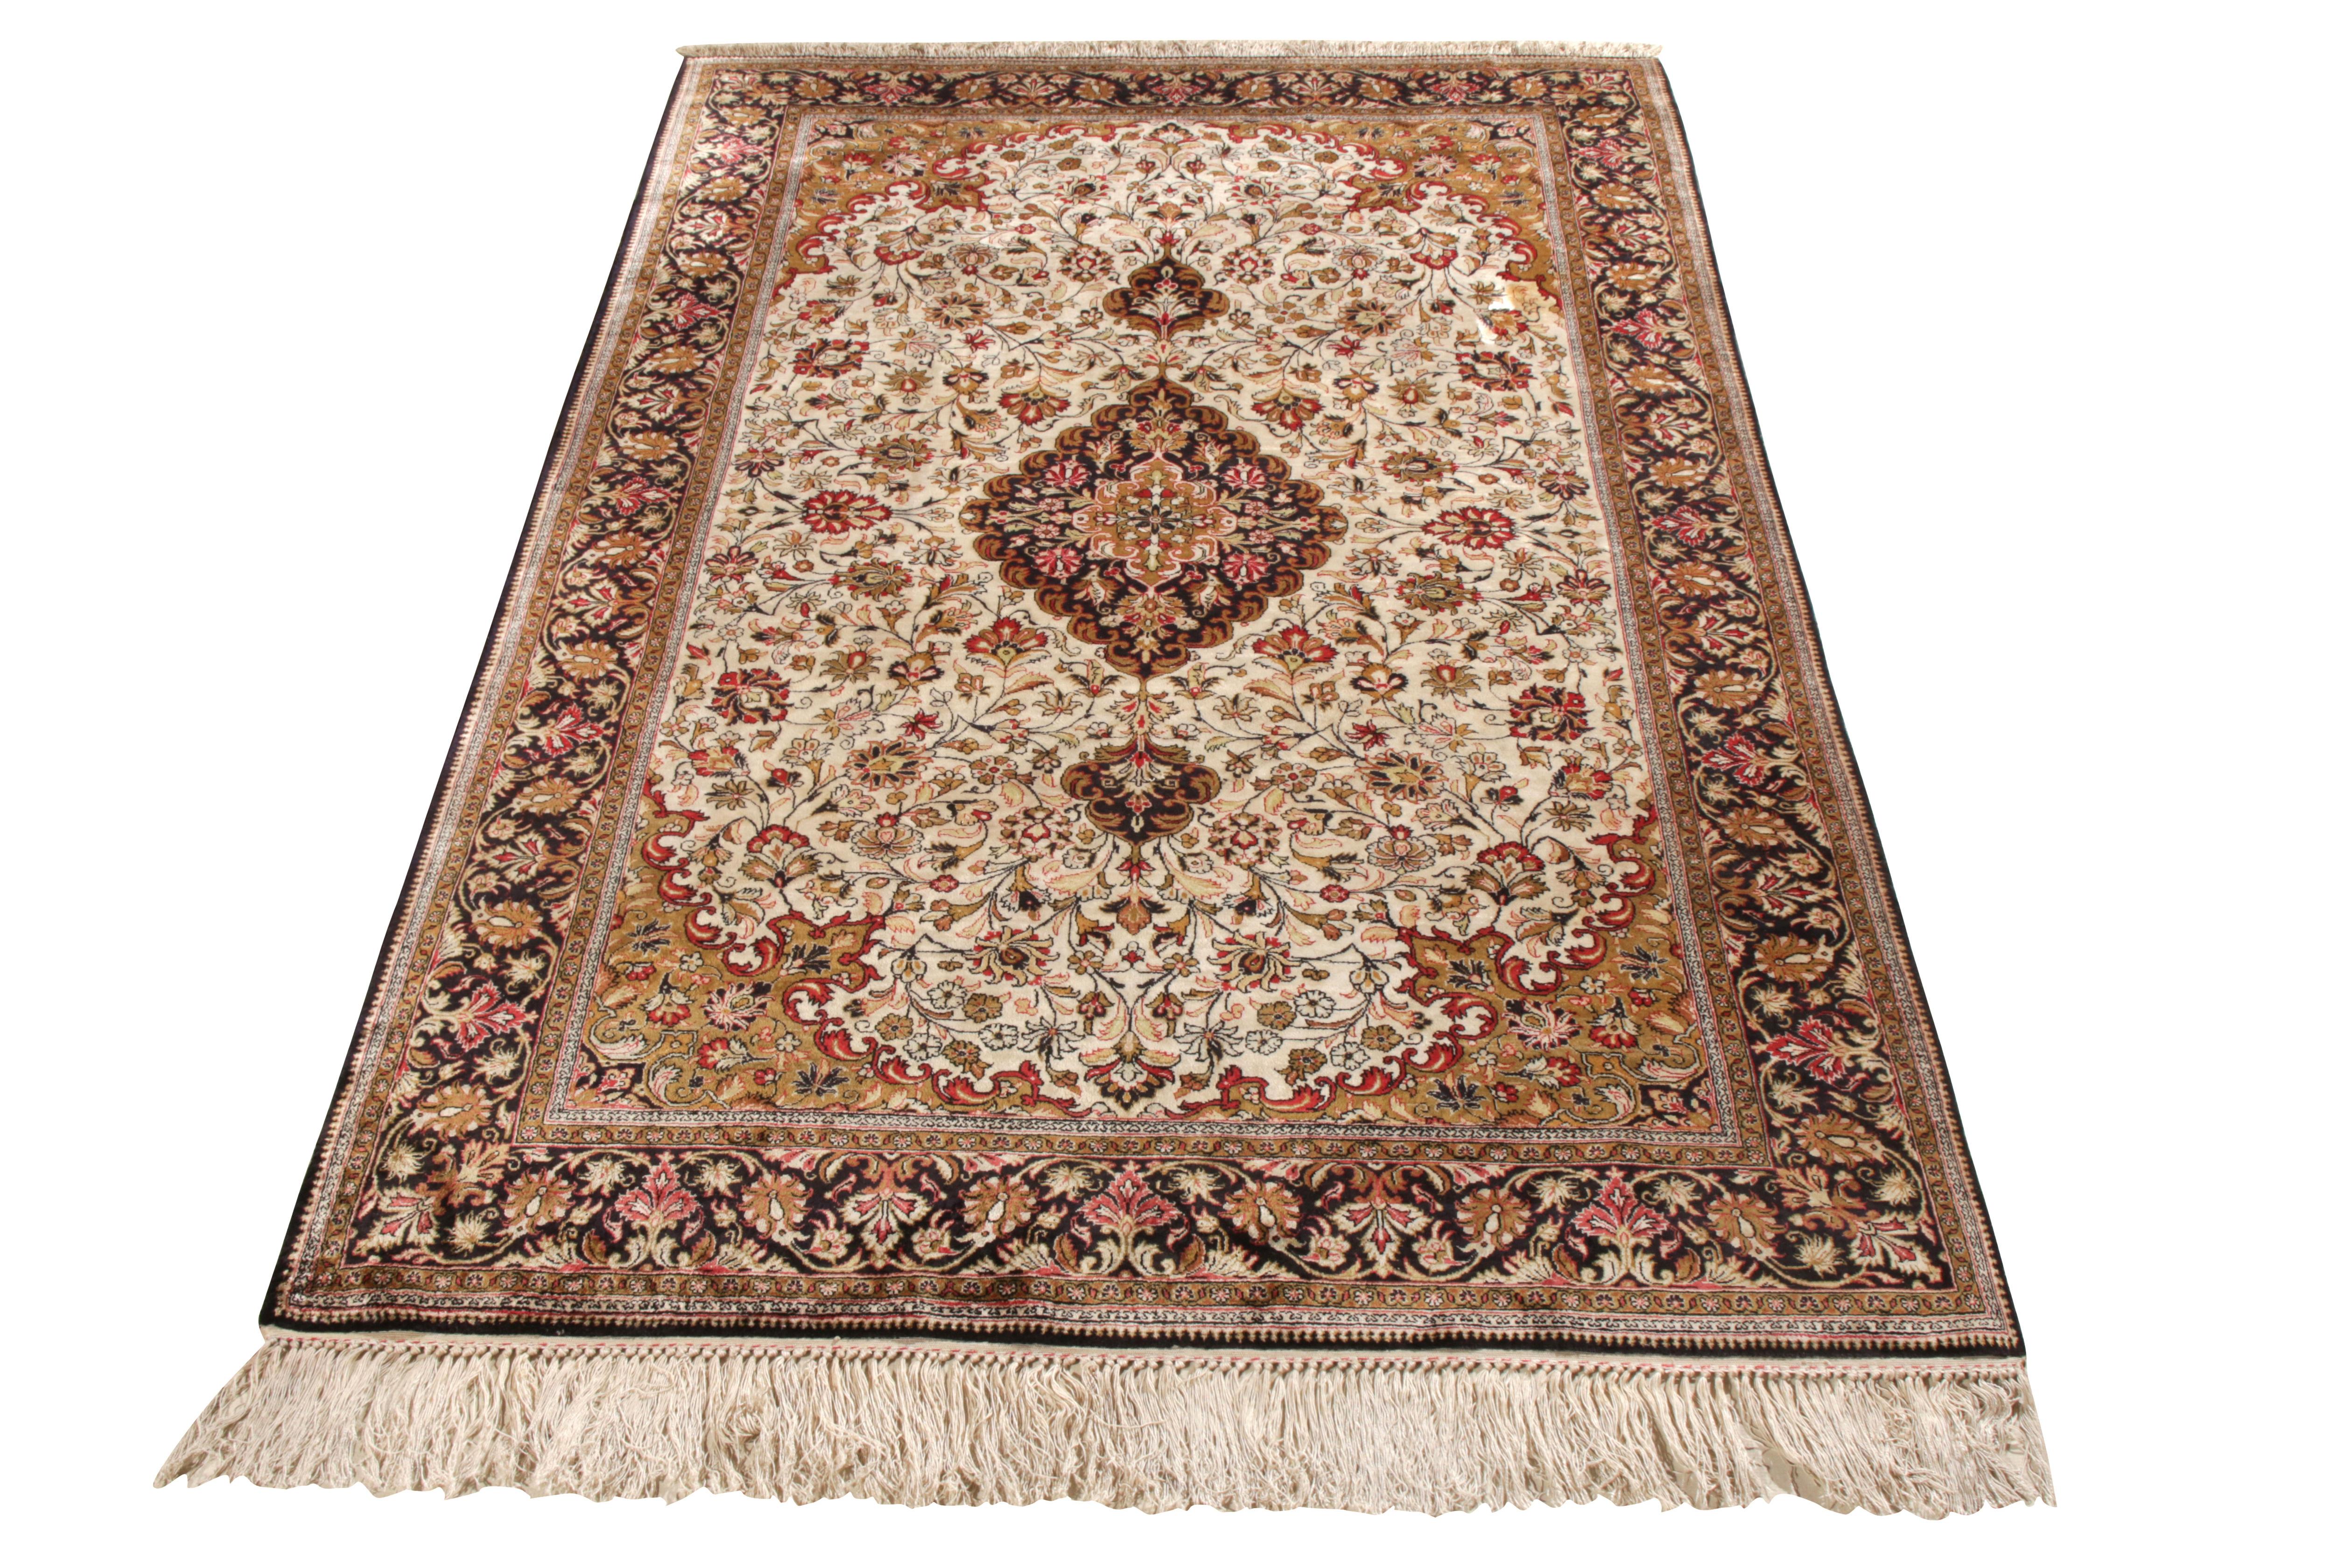 Emanating the fine craftsmanship of the 1950s, this hand-knotted mid-century Persian Qum rug makes way to Rug & Kilim’s Antique & Vintage collection. Characterised by a dense medallion and floral design embedded in a classy Black tone with muted